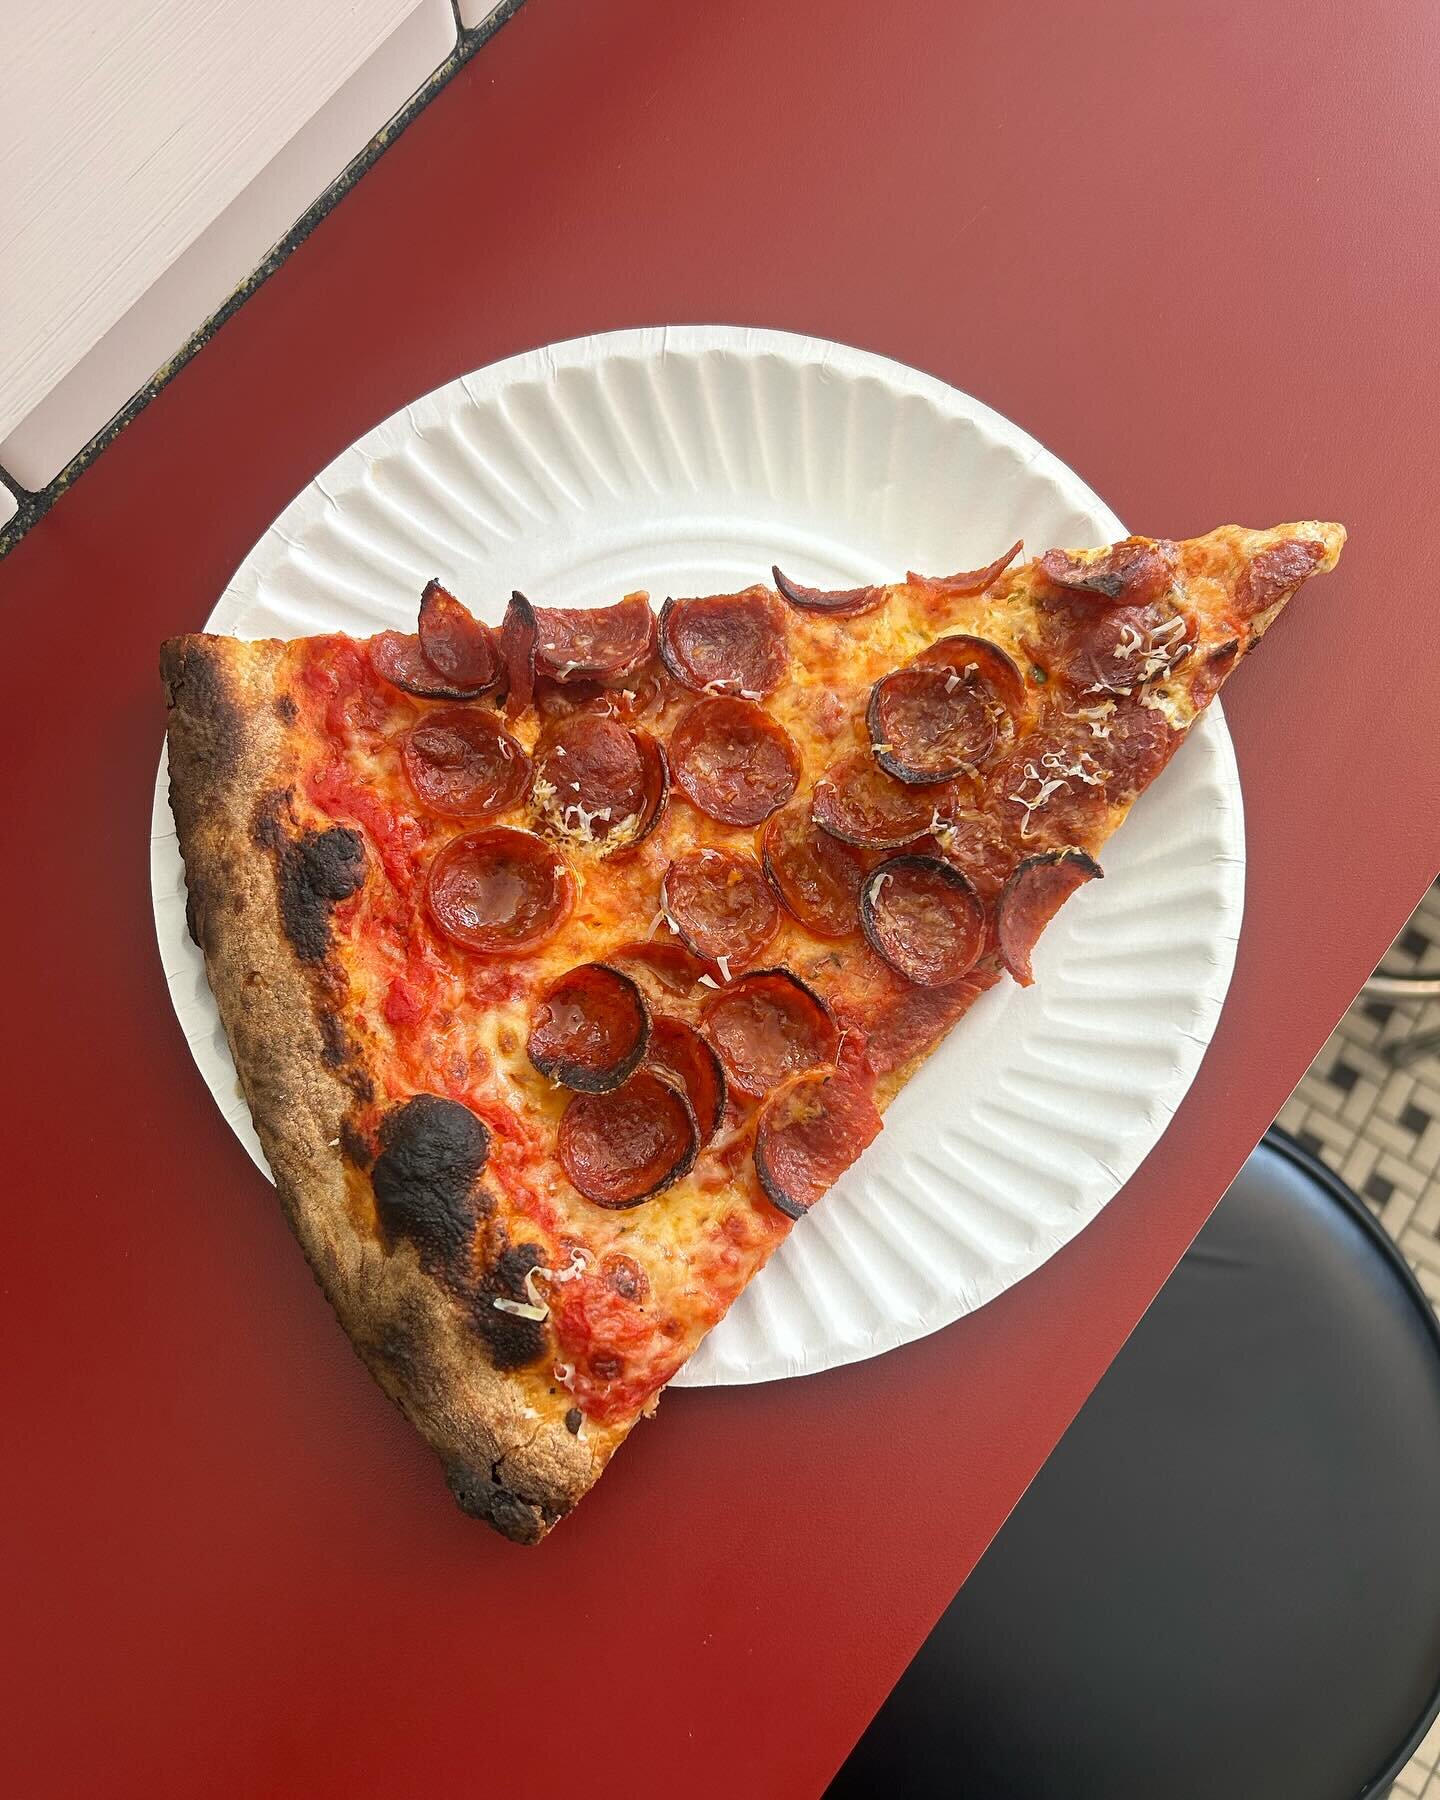 The sun is desperately trying to come out, a pepperoni slice might help it out. Here until 10pm &hearts;️🍕